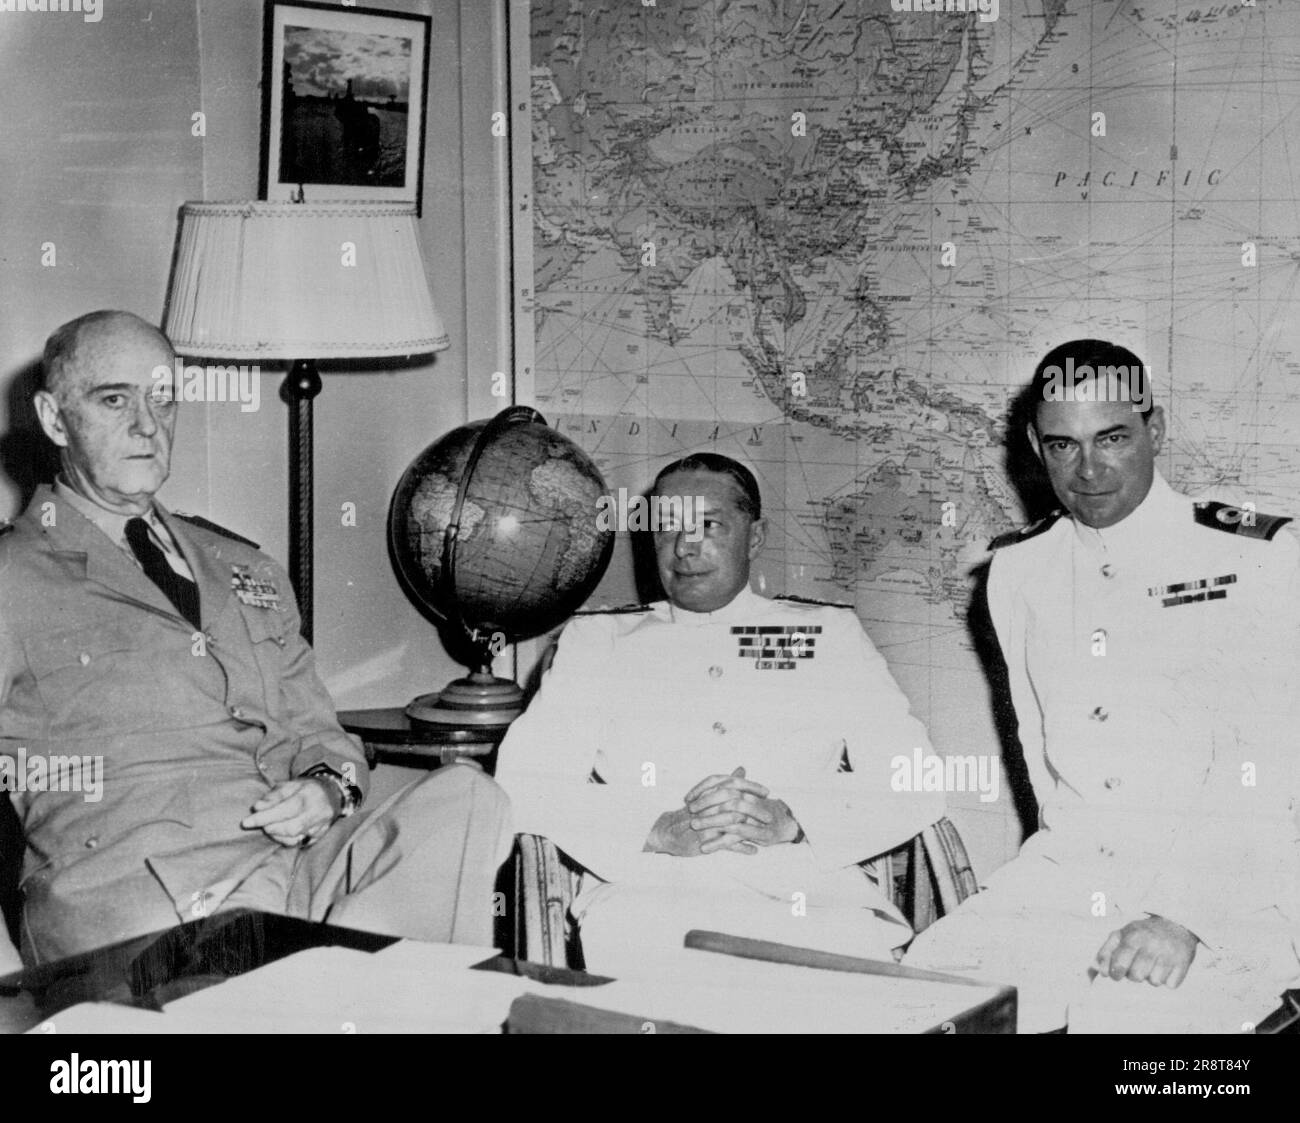 Anzus Talks - Admiral Felix B. Stump, USN, left, Commander in Chief, Pacific and U.S. Pacific Fleet; Vice Adm. Sir John Collins, Royal Australian Navy, center, and Commodore Sir Charles Madden, Royal Navy, who represented New Zealand are pictured as they began closed session talks Dec. 10 at Pacific Fleet headquarters, Pearl Harbor, Hawaii. Admiral Stump. 'fire back.' December 13, 1953. (Photo by U.S. Navy Photo). Stock Photo